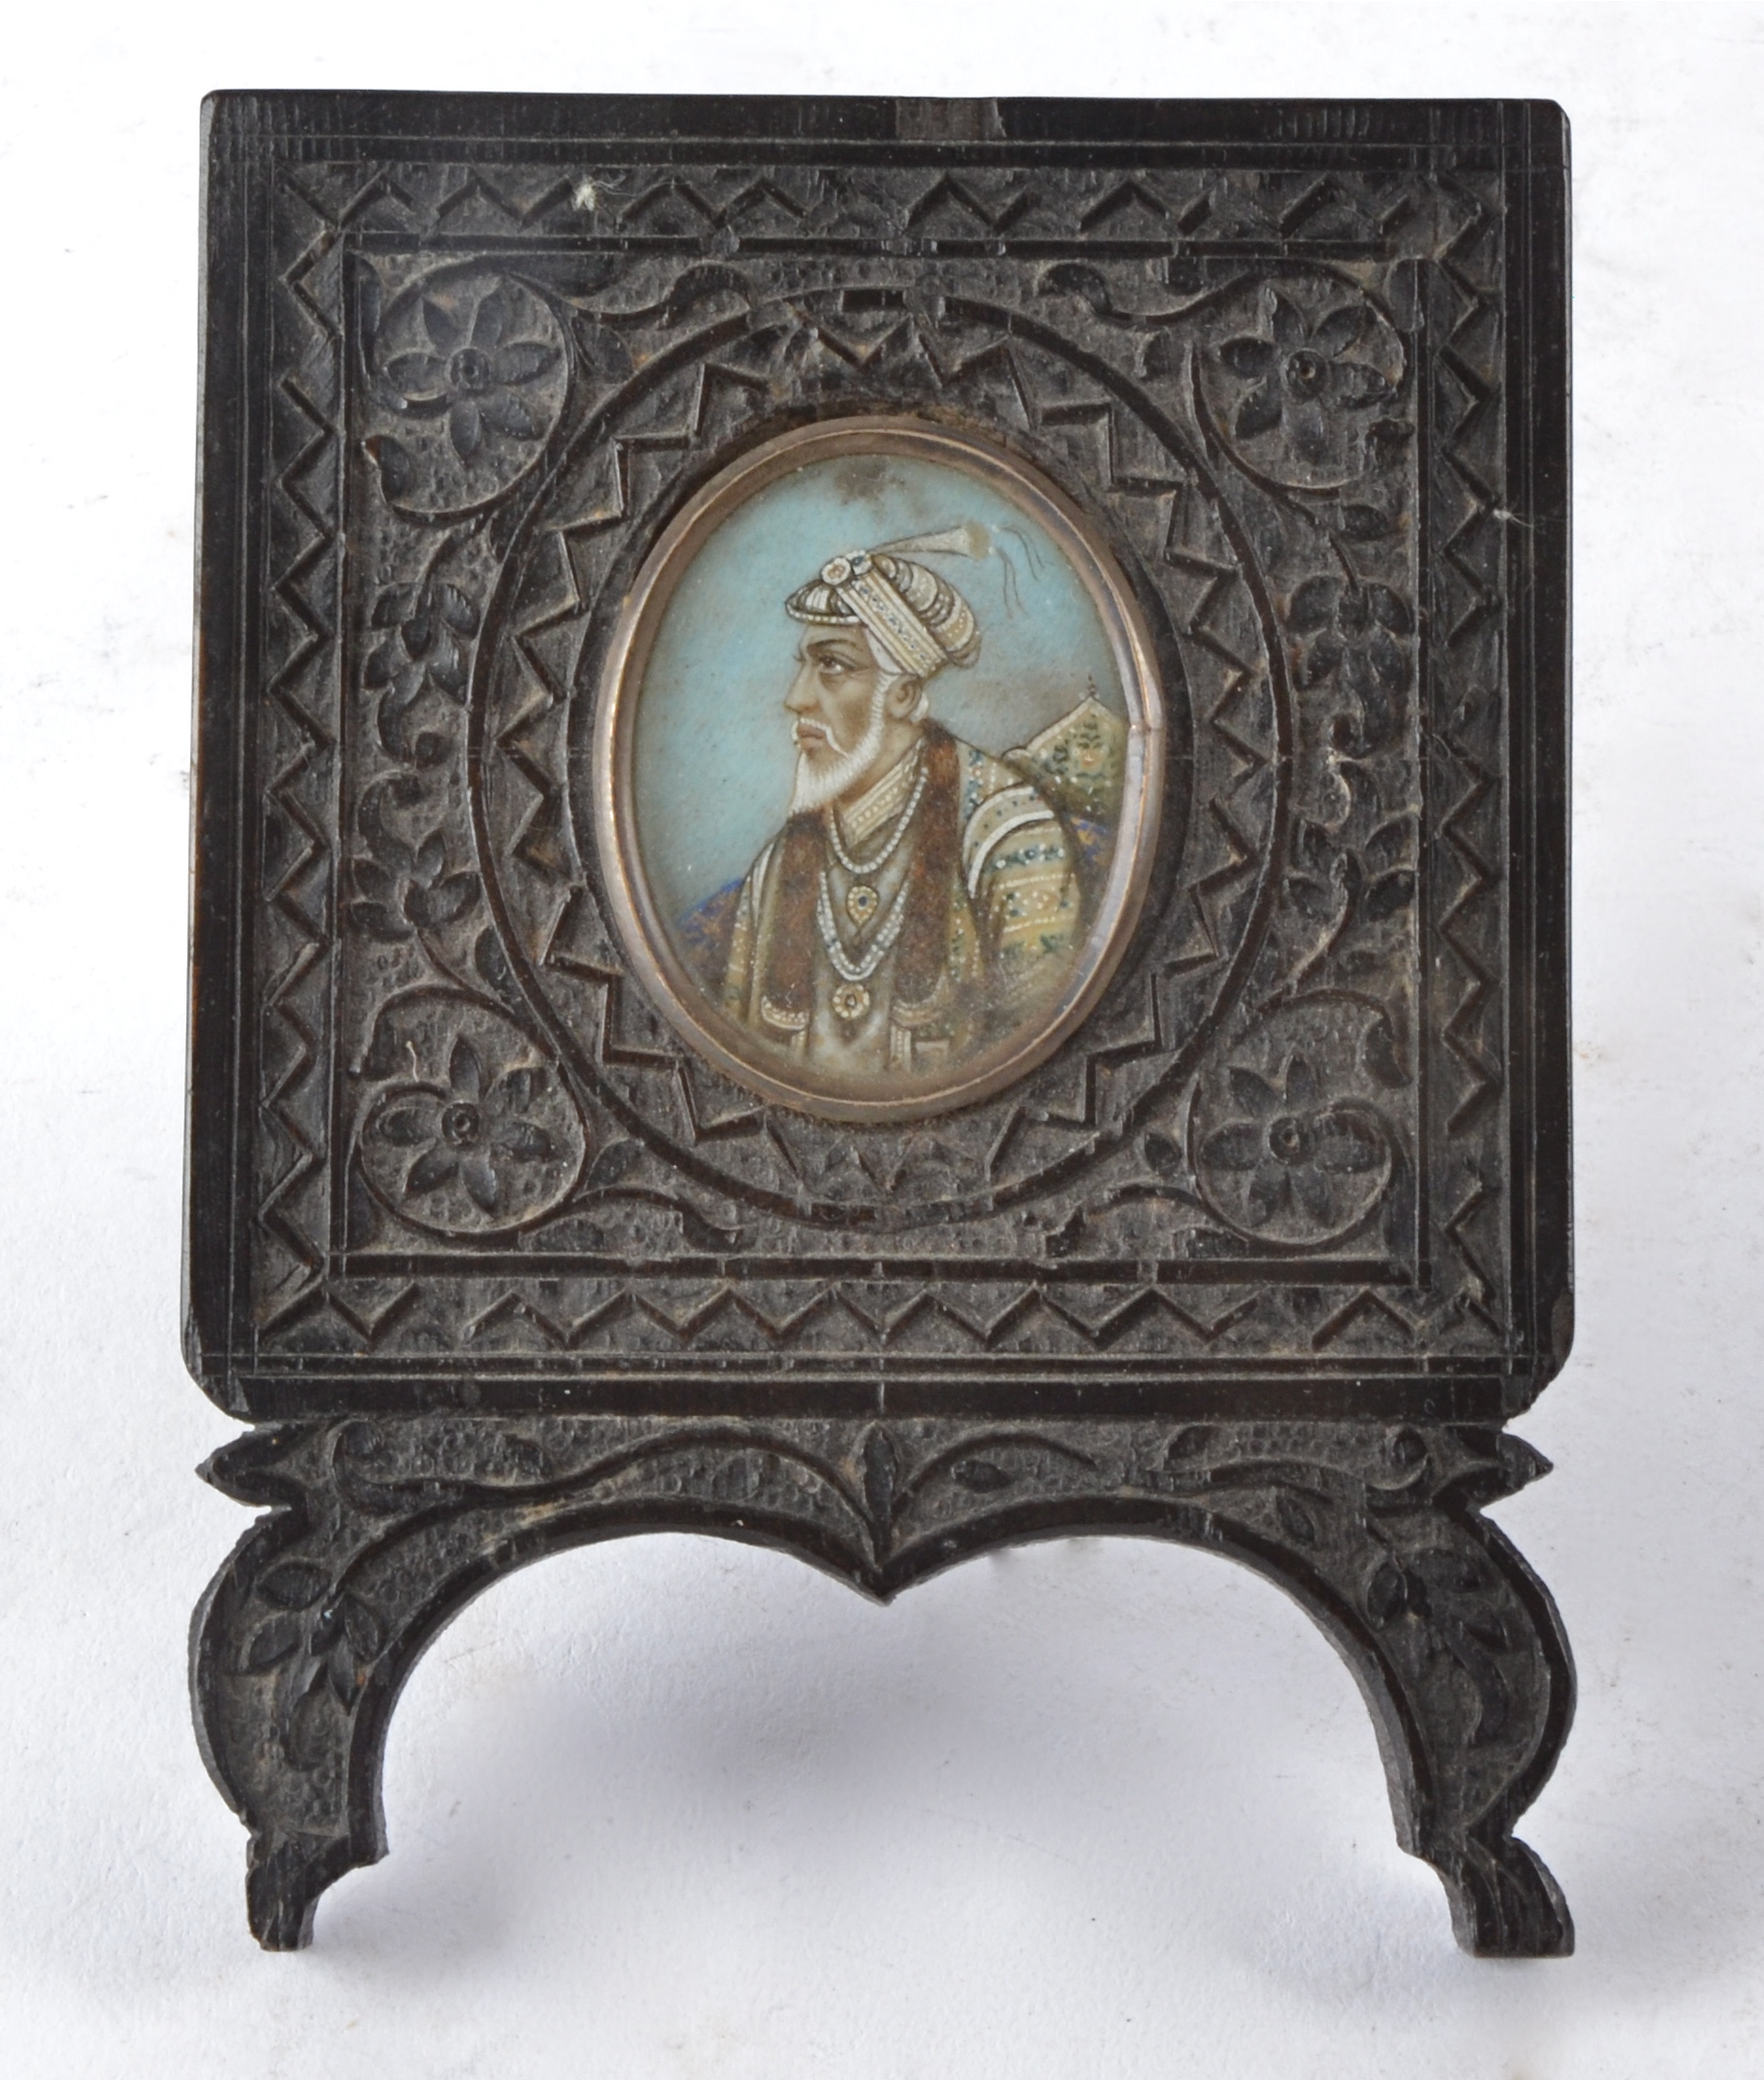 An oval Indian miniature portrait painting, encased in a profusely carved ebonised surround, 11cm